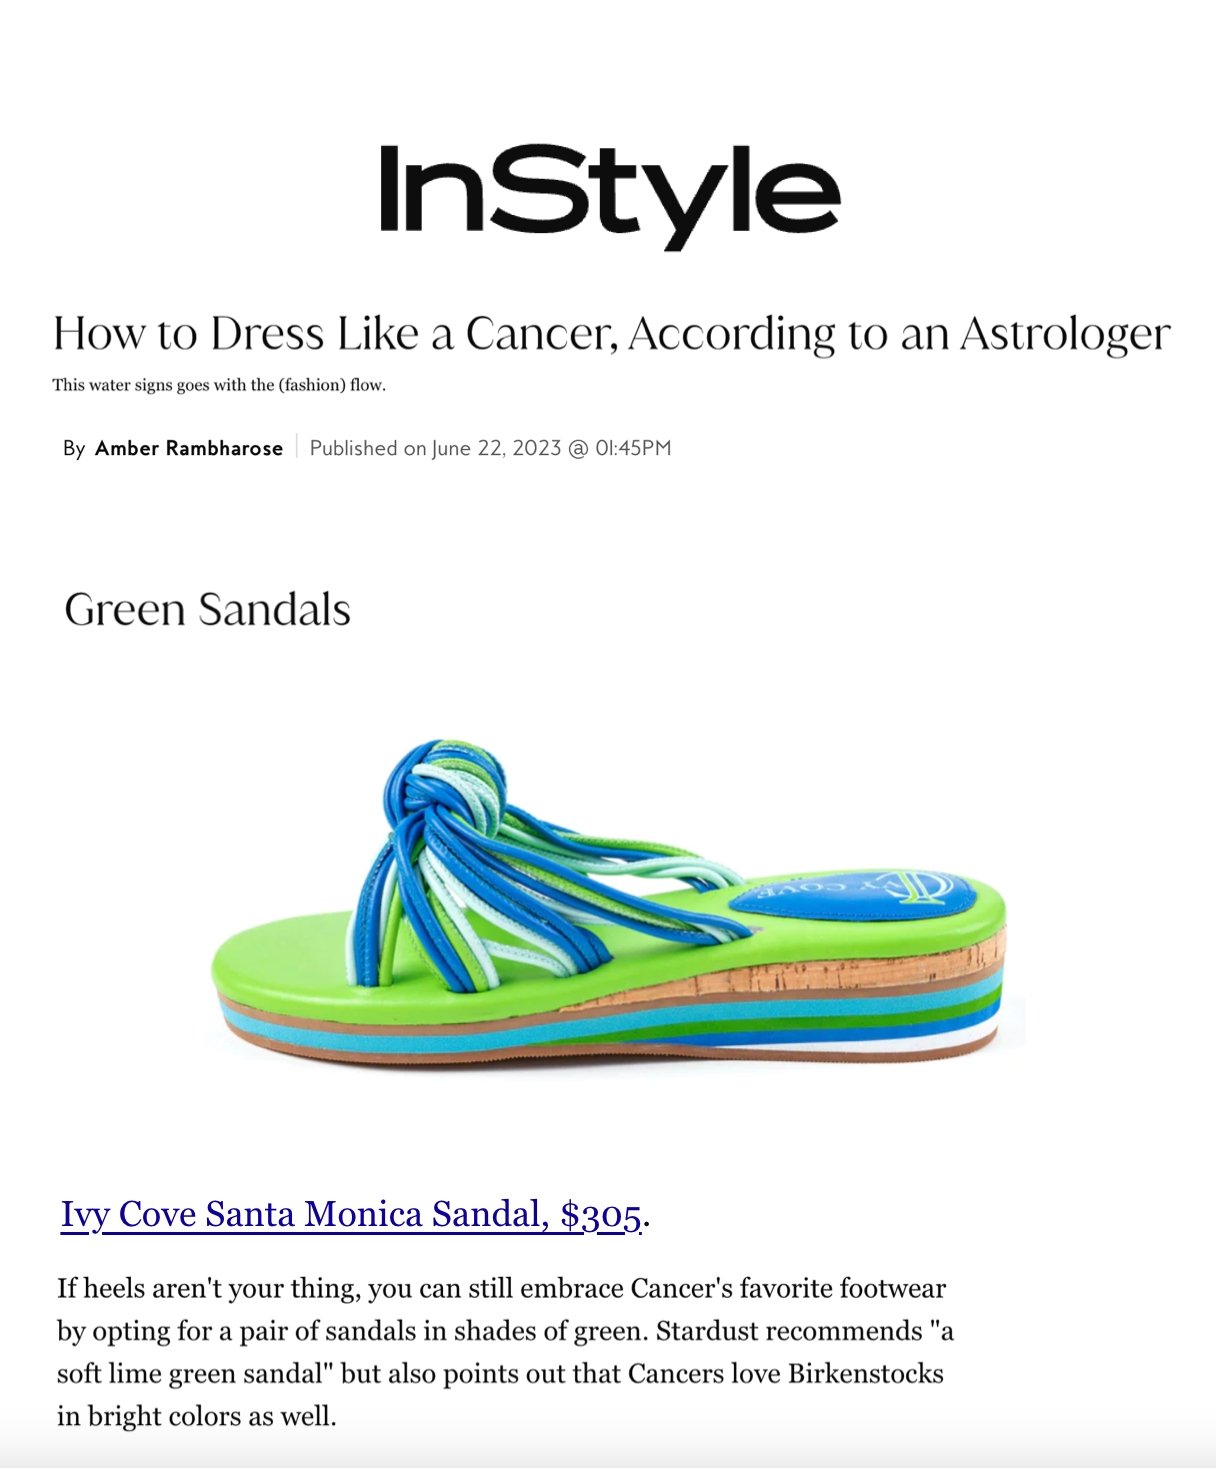 It's Cancer Season! InStyle Features the Santa Monica Sandal - Ivy Cove Montecito